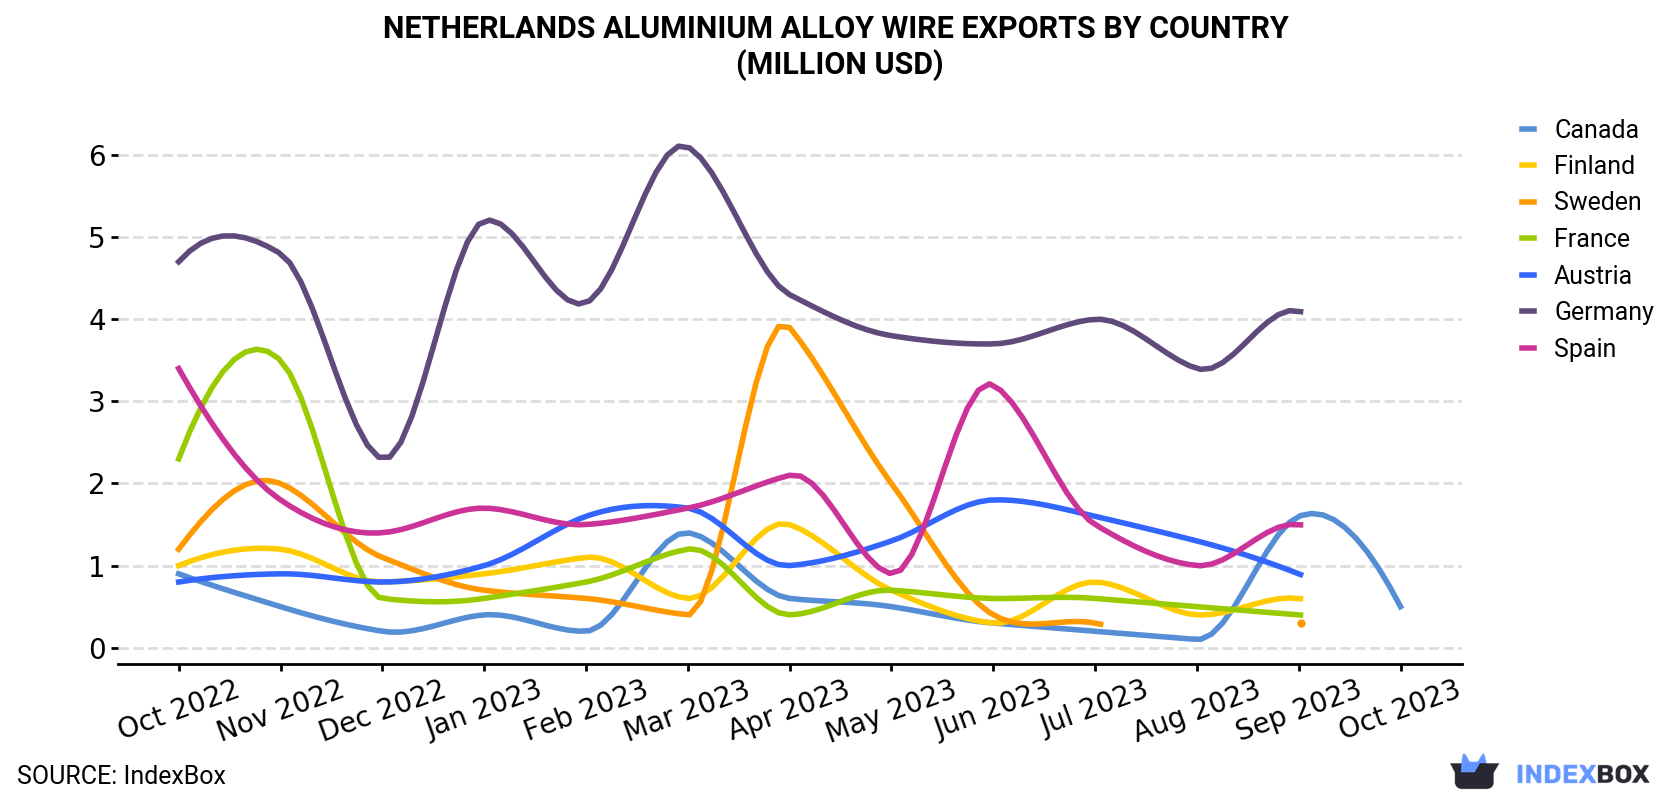 Netherlands Aluminium Alloy Wire Exports By Country (Million USD)